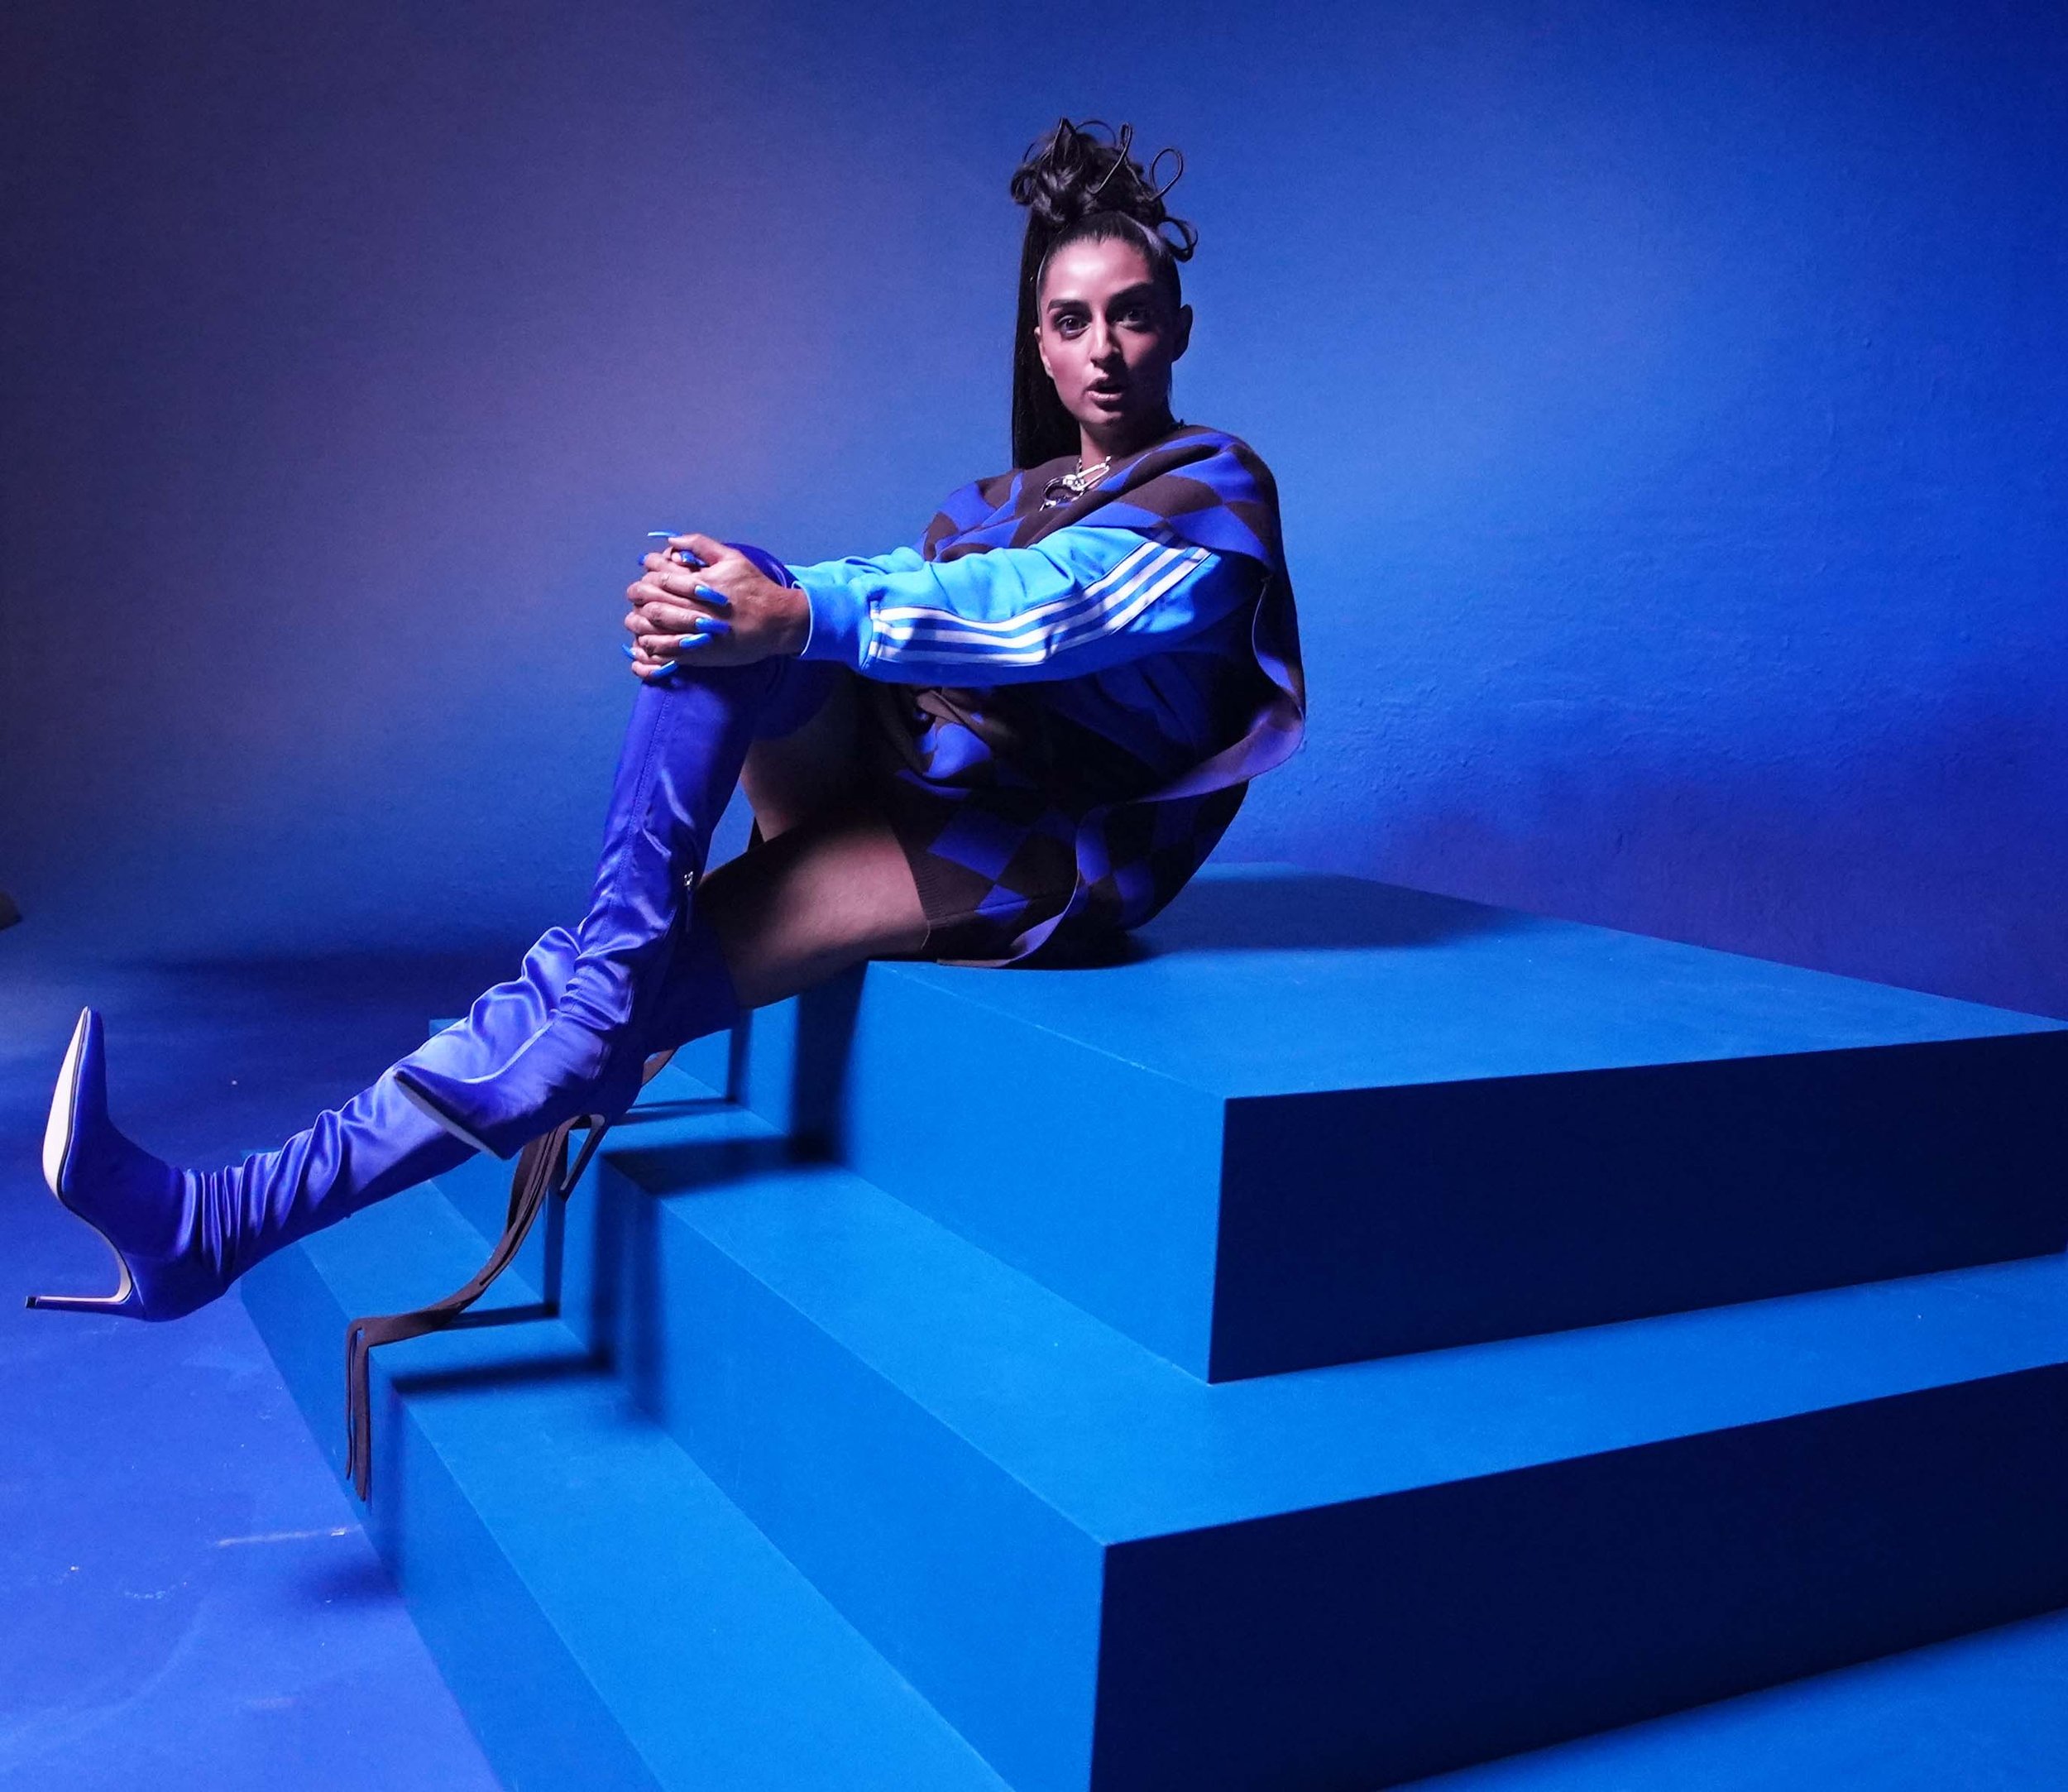 "A Hue of Blue" || Adidas x Nowness 